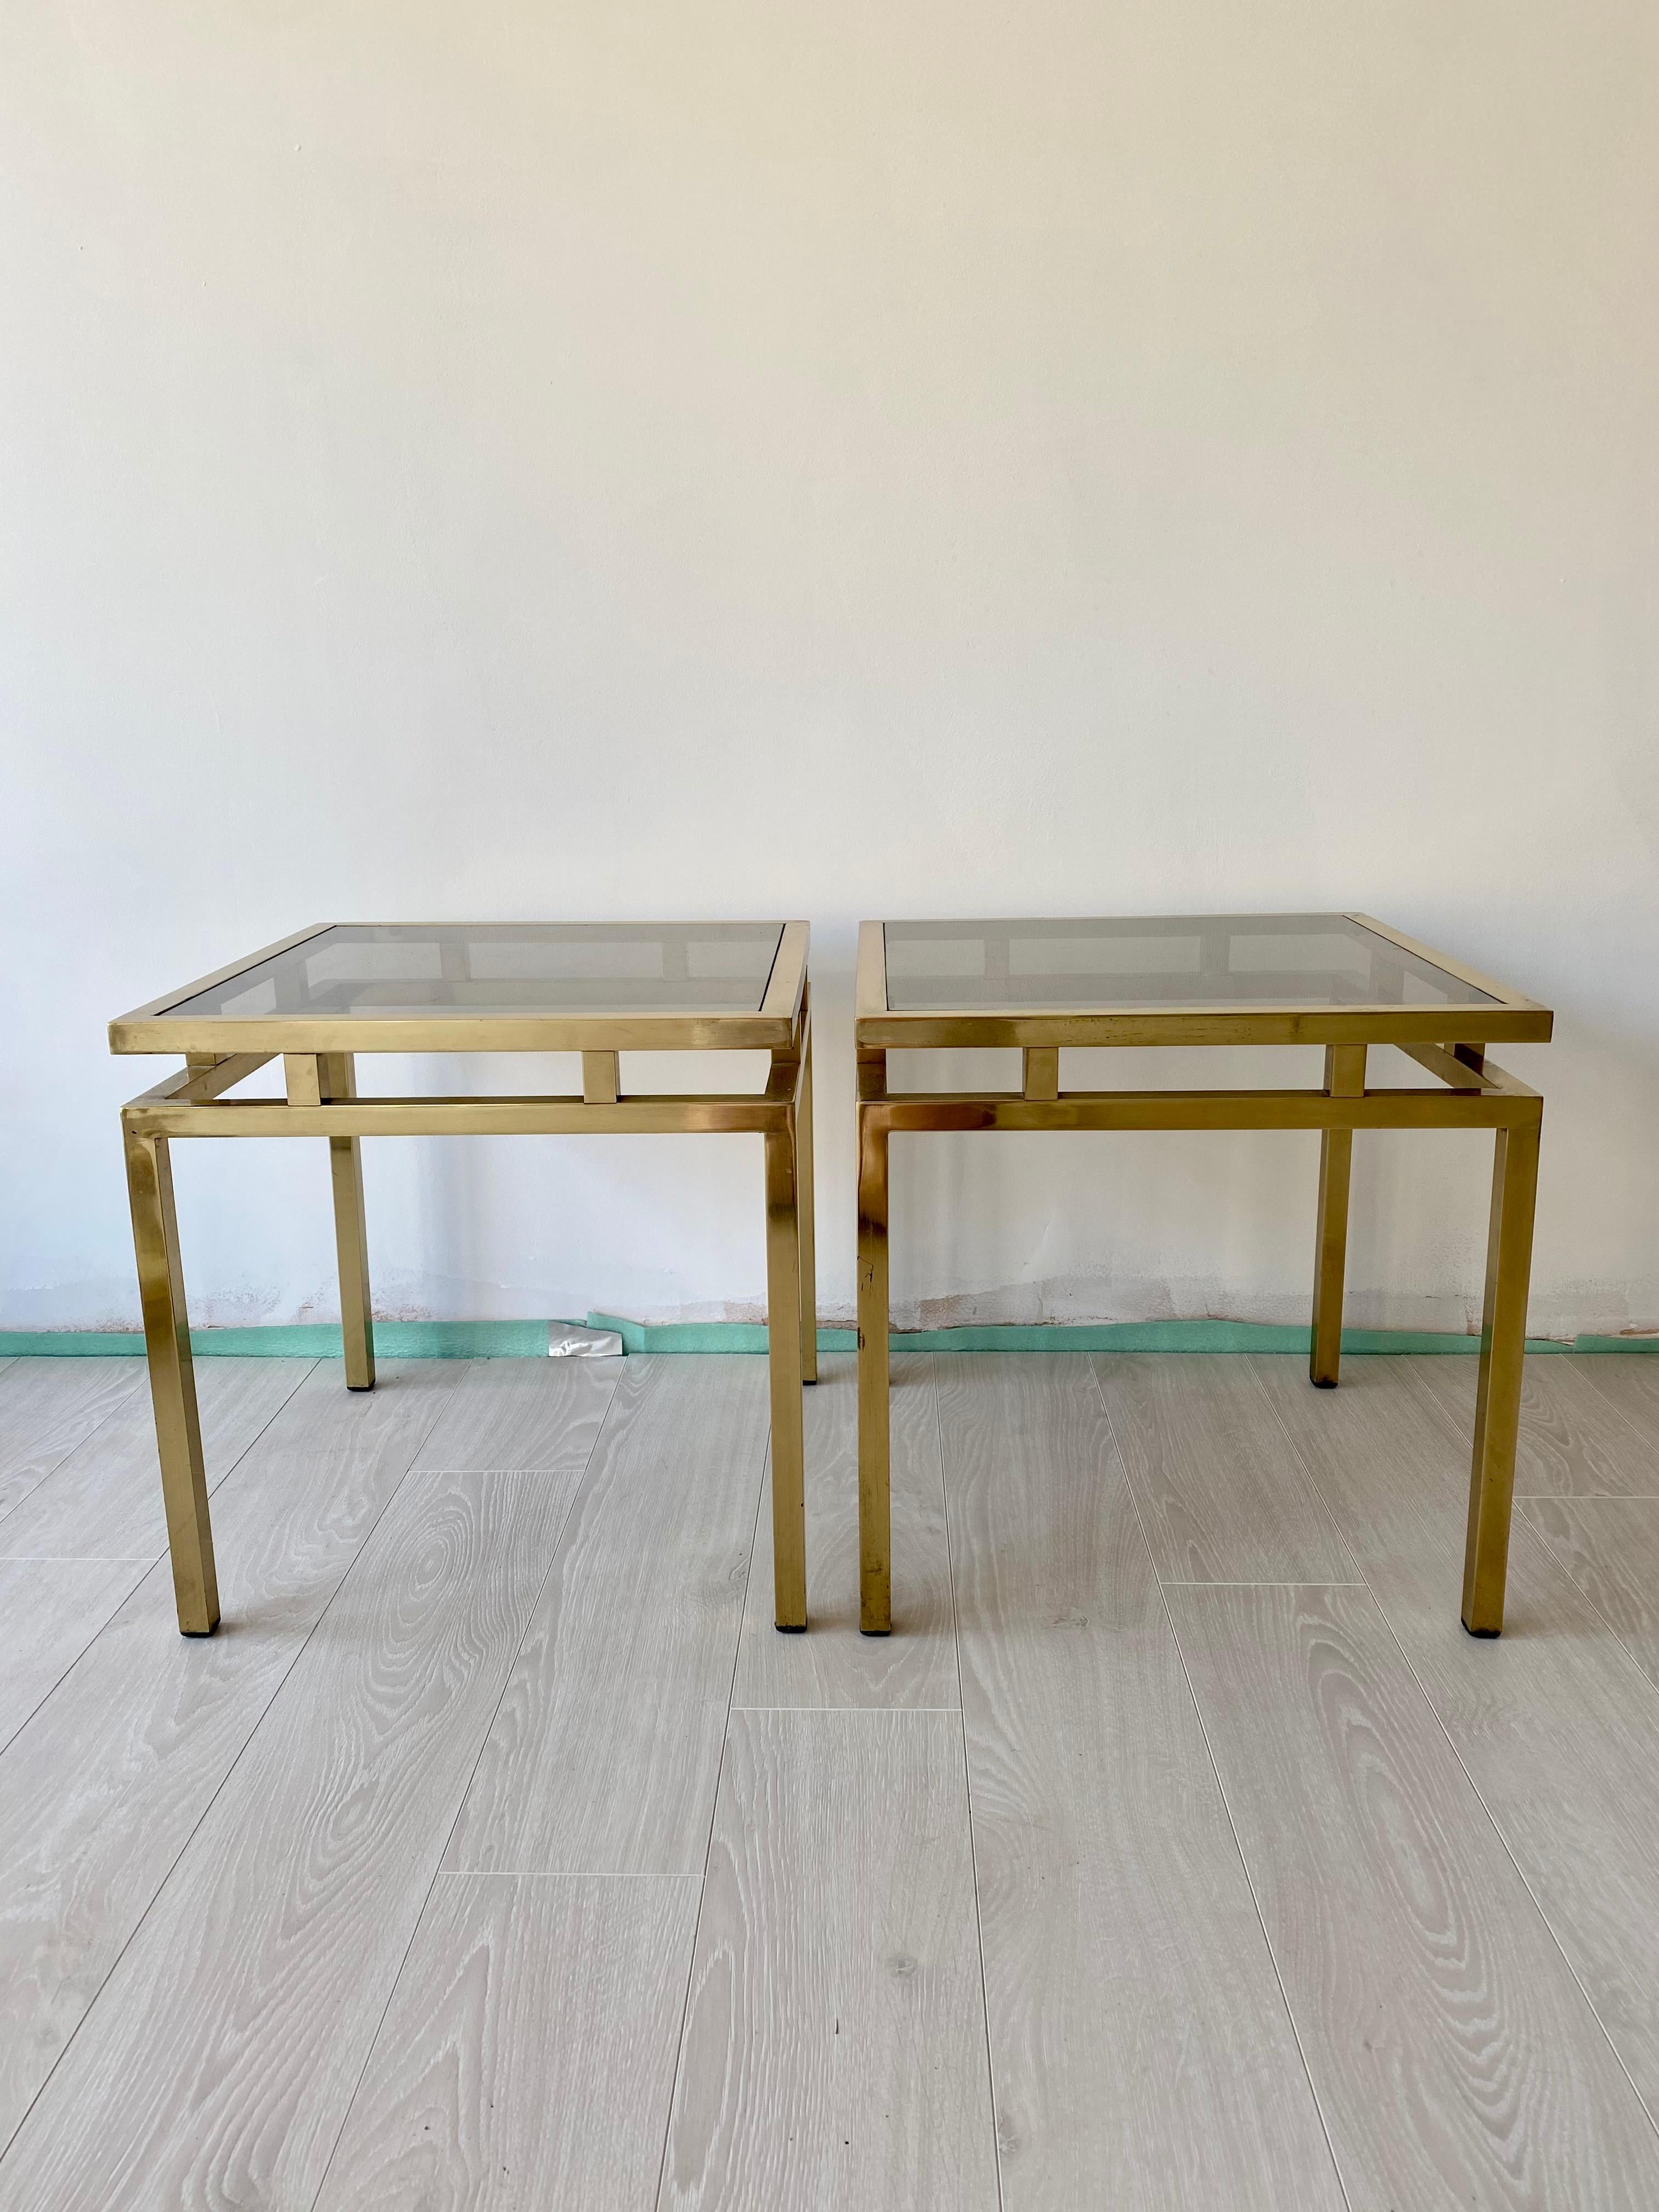 Pair of vintage French brass side tables with original smoked glass tops.

Lovely aged patina to the frame

A fabulous pair of decorative side tables which would work in both a classic and modern interior.

Measures 46cm square, stand 46cm